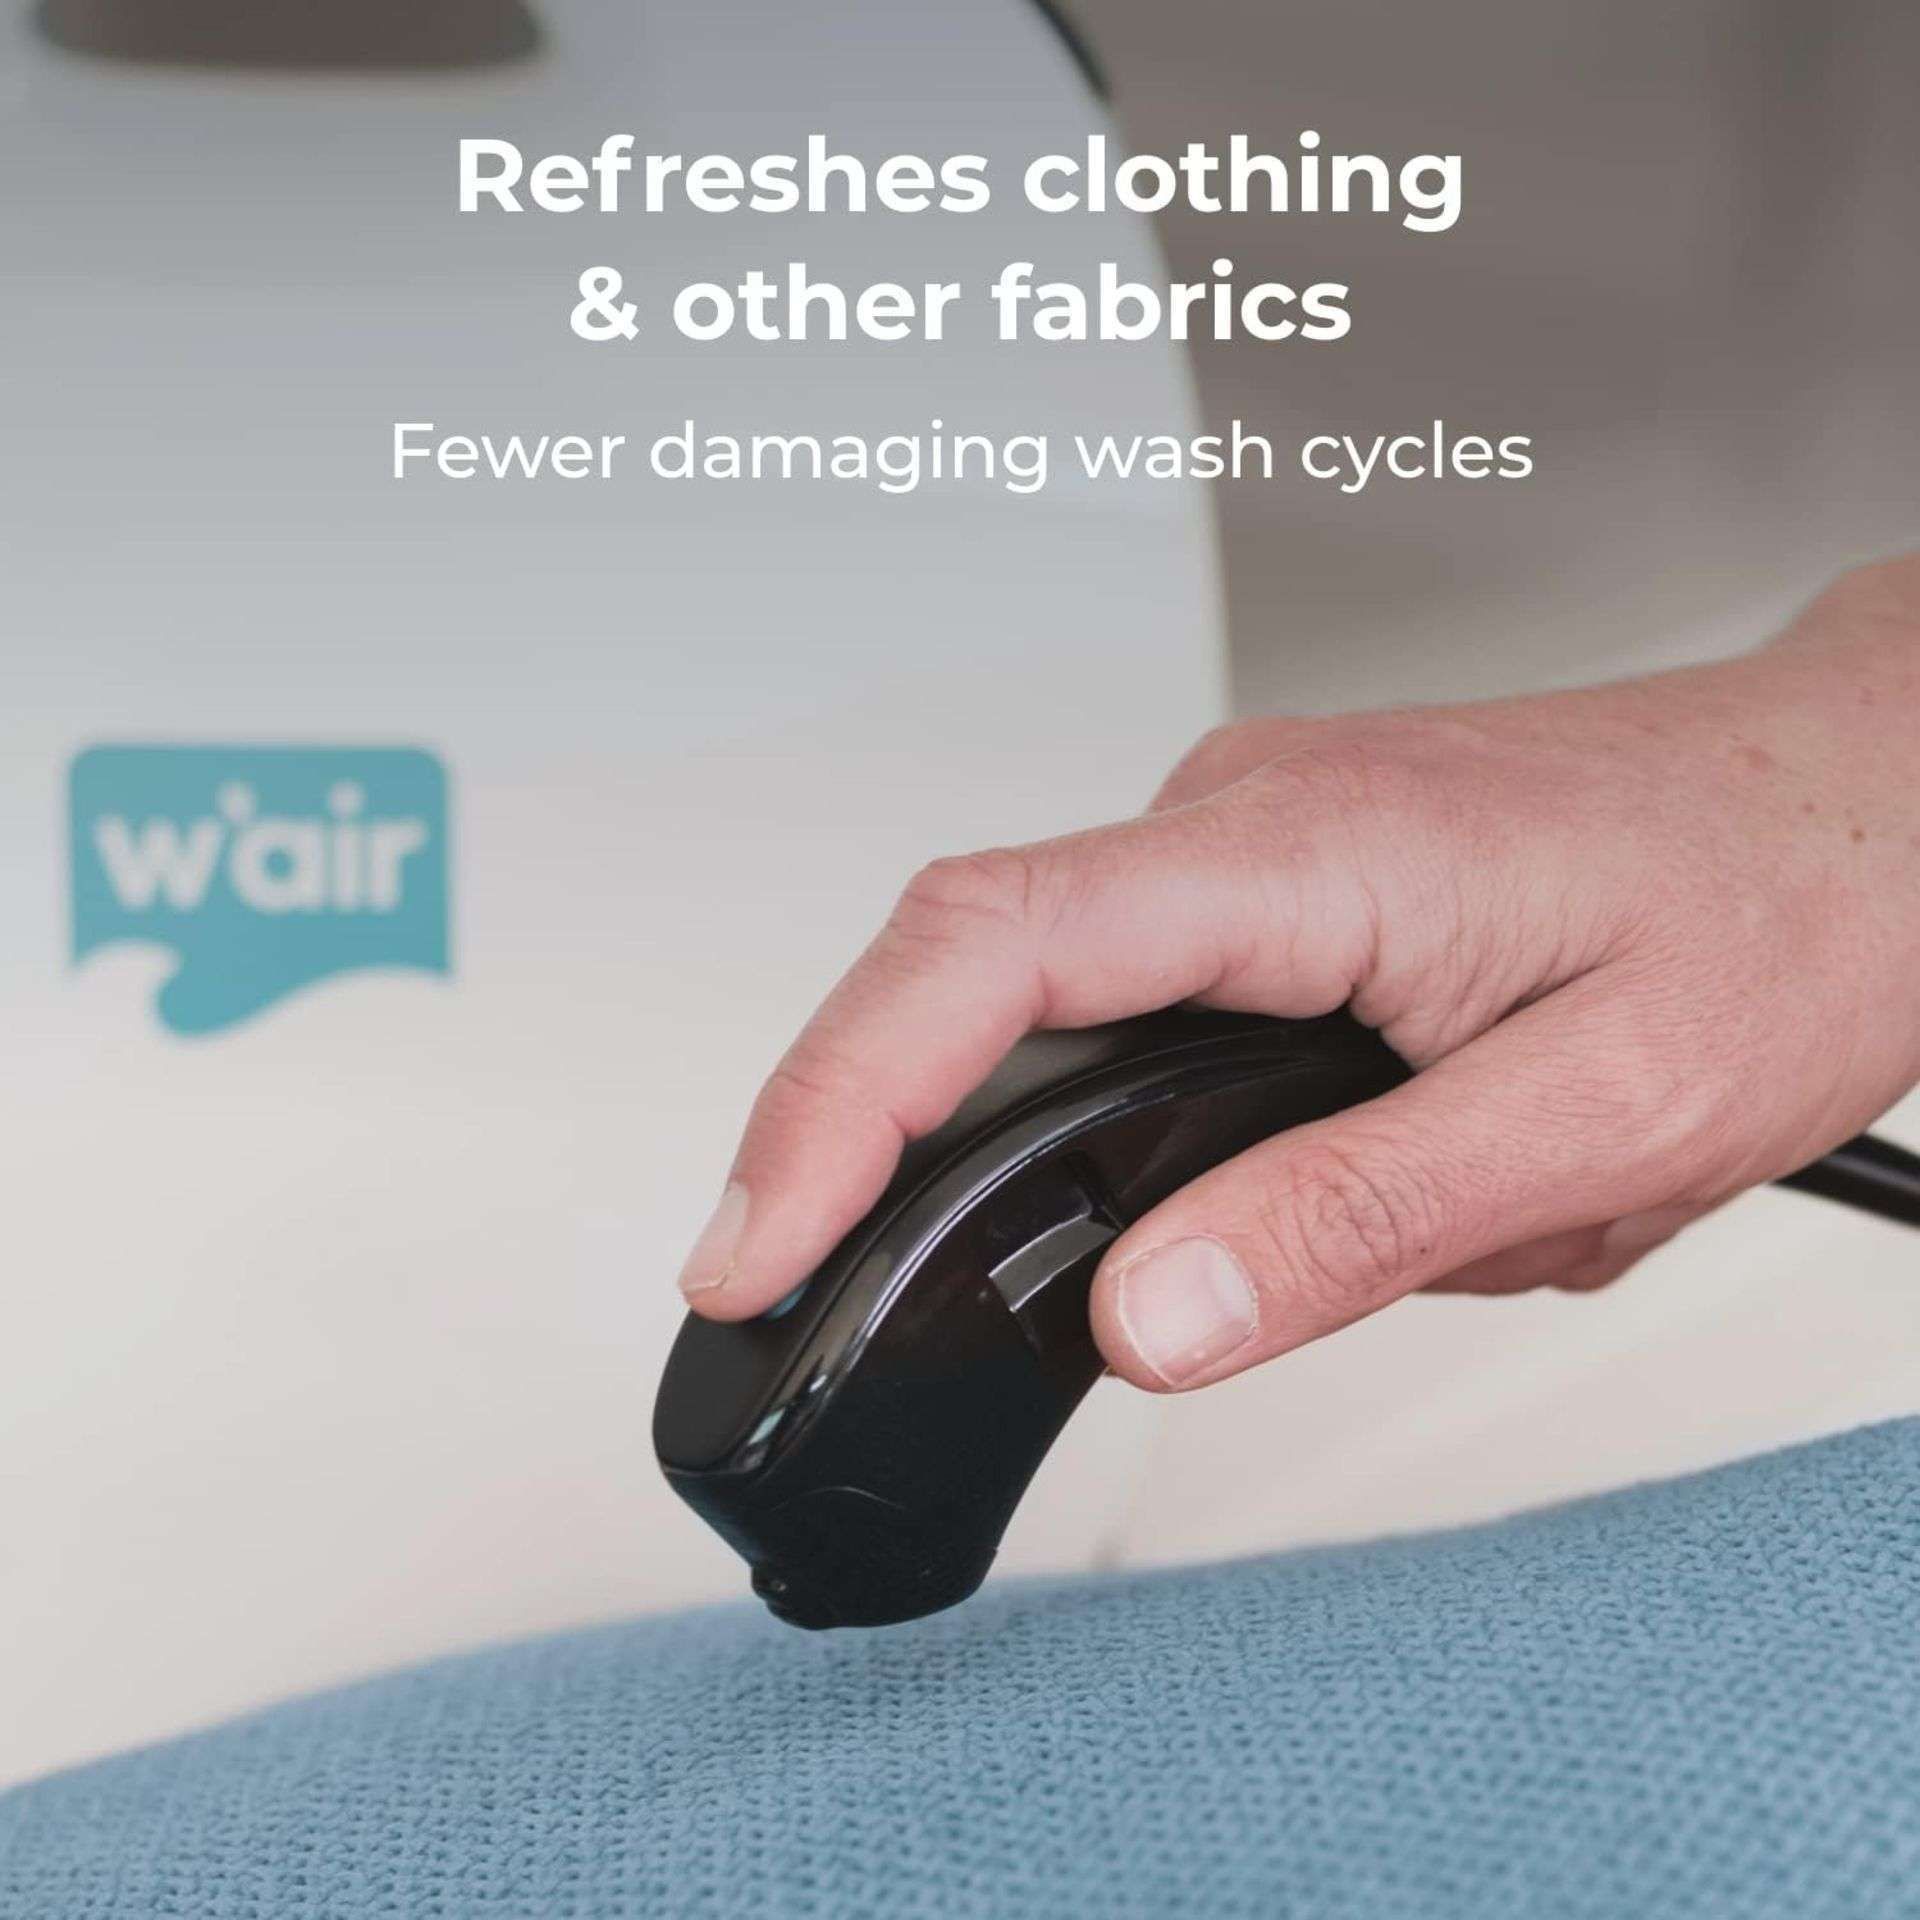 10 X BRAND NEW W'AIR SNEAKER CLEANING SYSTEMS RRP £299, The w'air uses hydrodynamic technology - Image 4 of 6